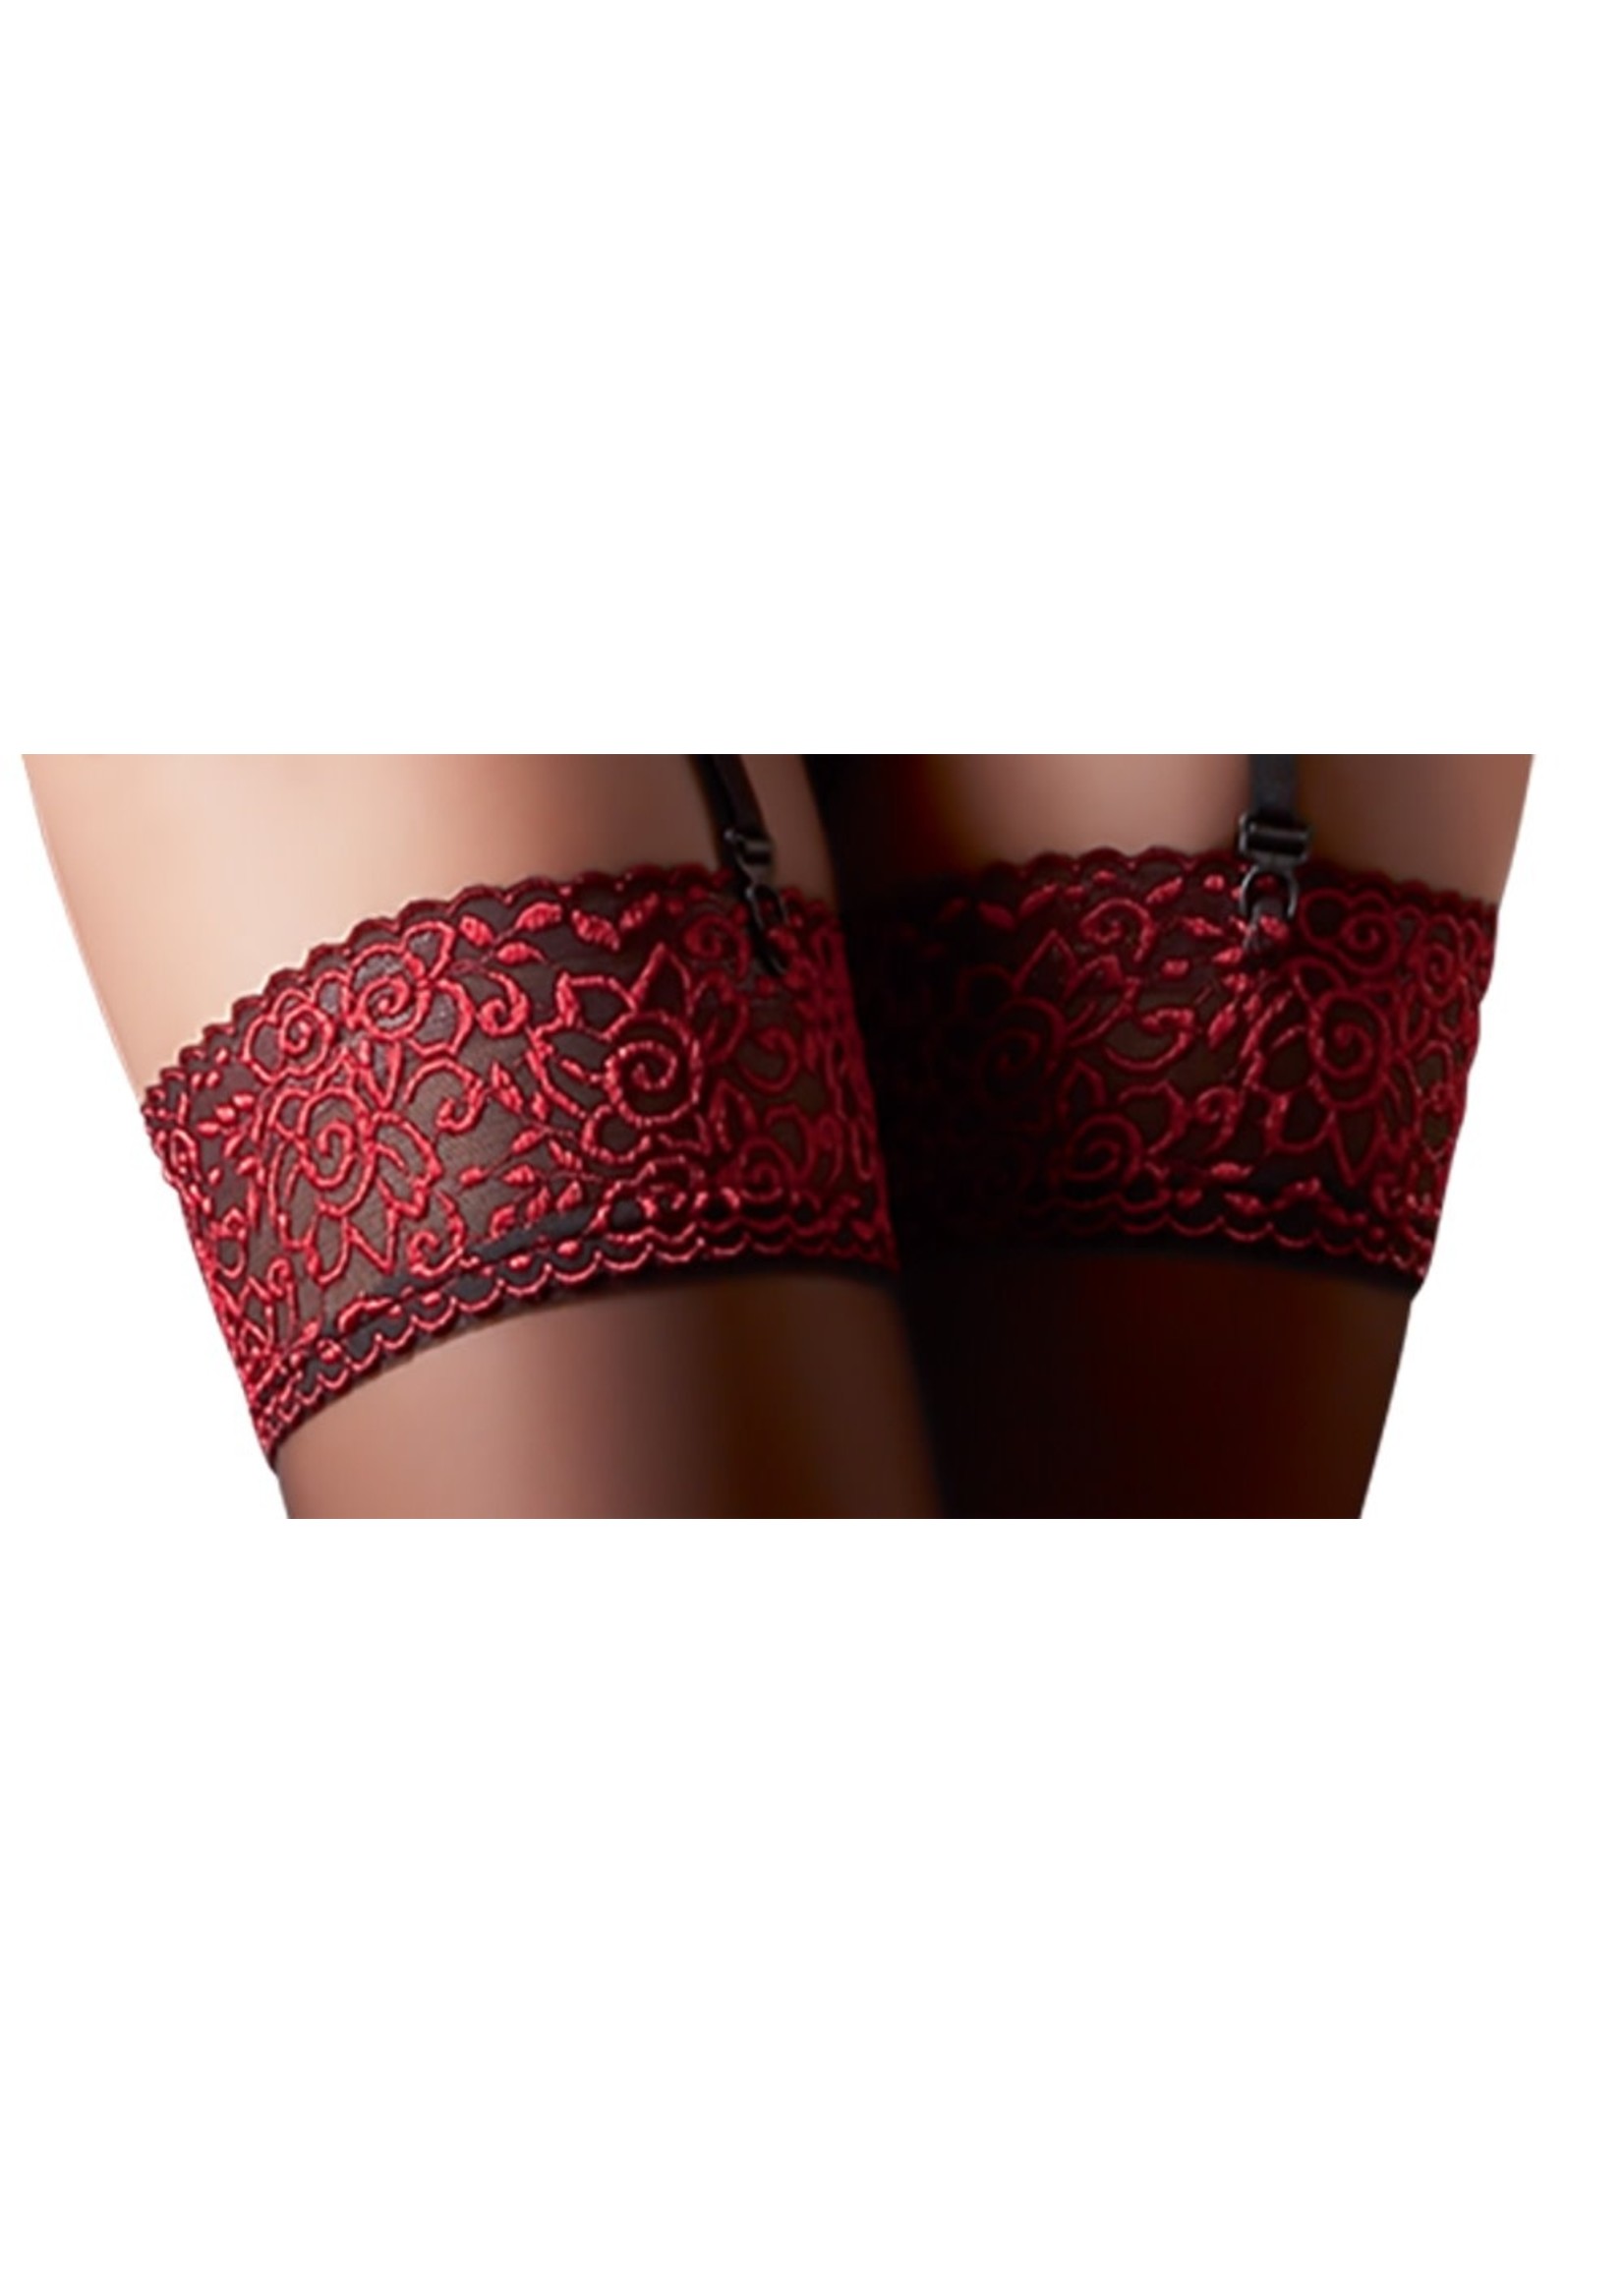 Cotteli Collection Black stockings with dark red lace